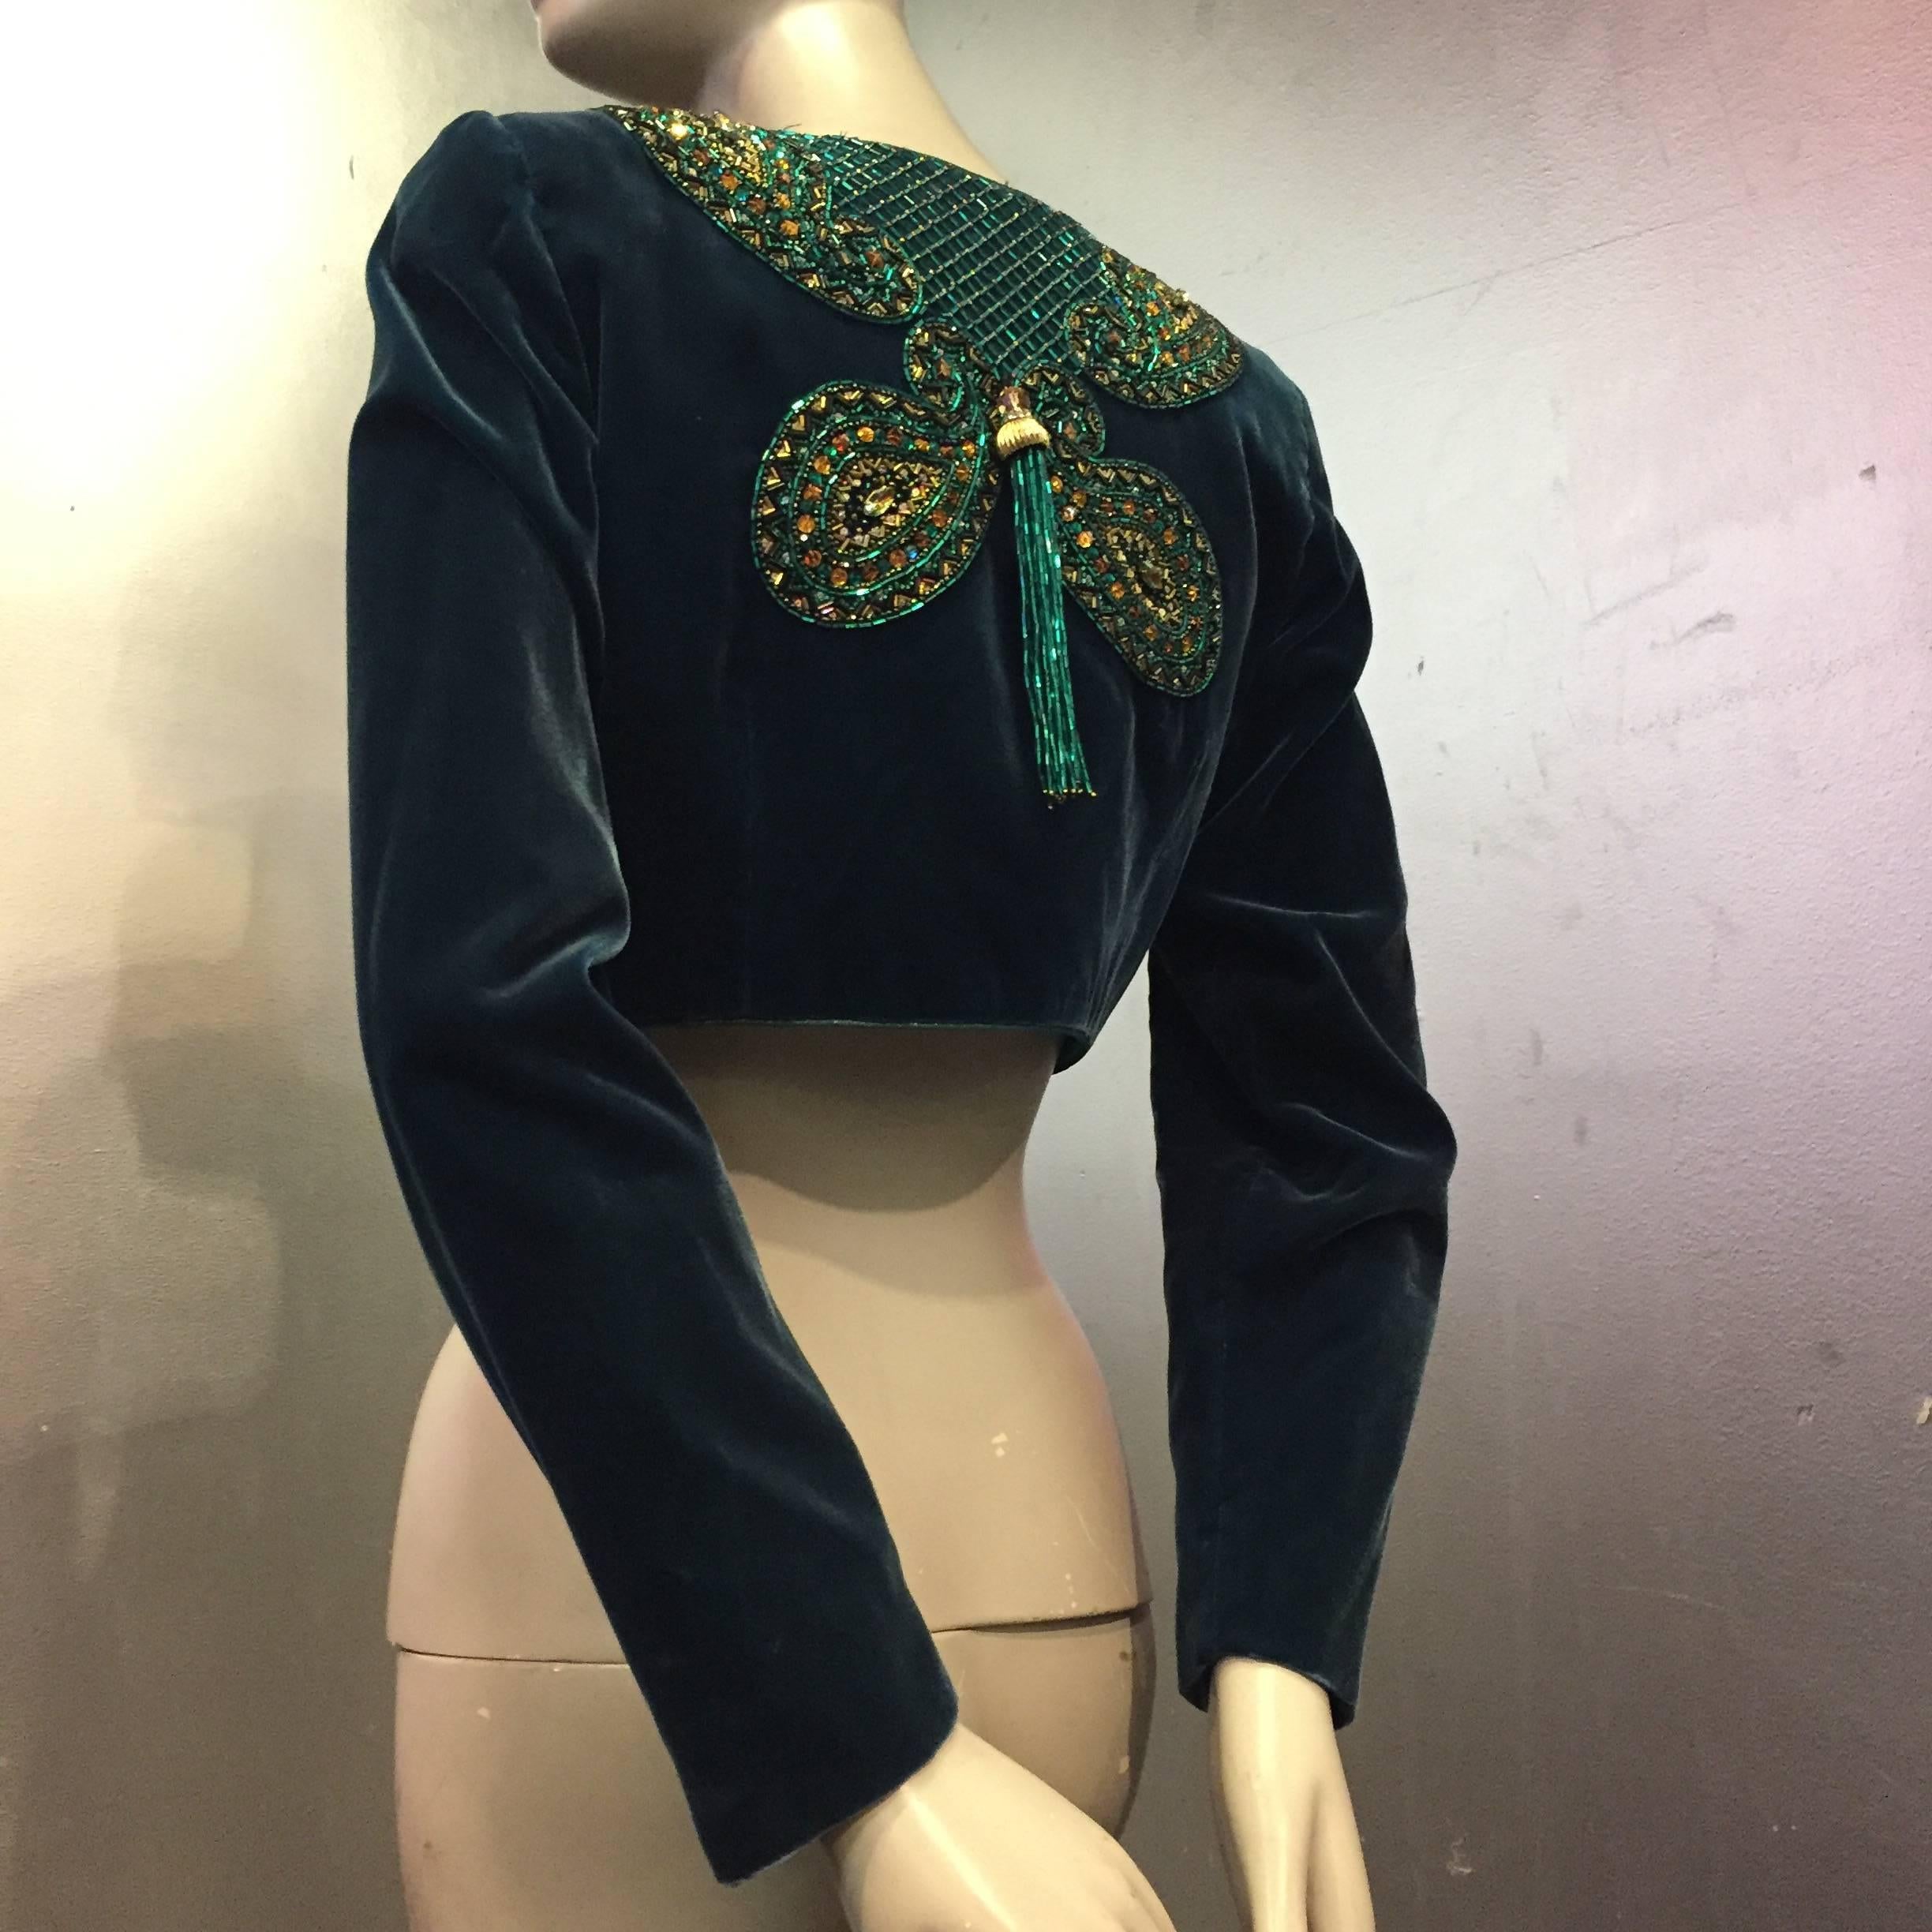 A dramatically beaded silk velvet bolero with turquoise lining. Beaded bodice features a netted pattern with a large beaded tassel by each shoulder. The back consists of a modified cloverleaf motif with a single large tassel at the center of the